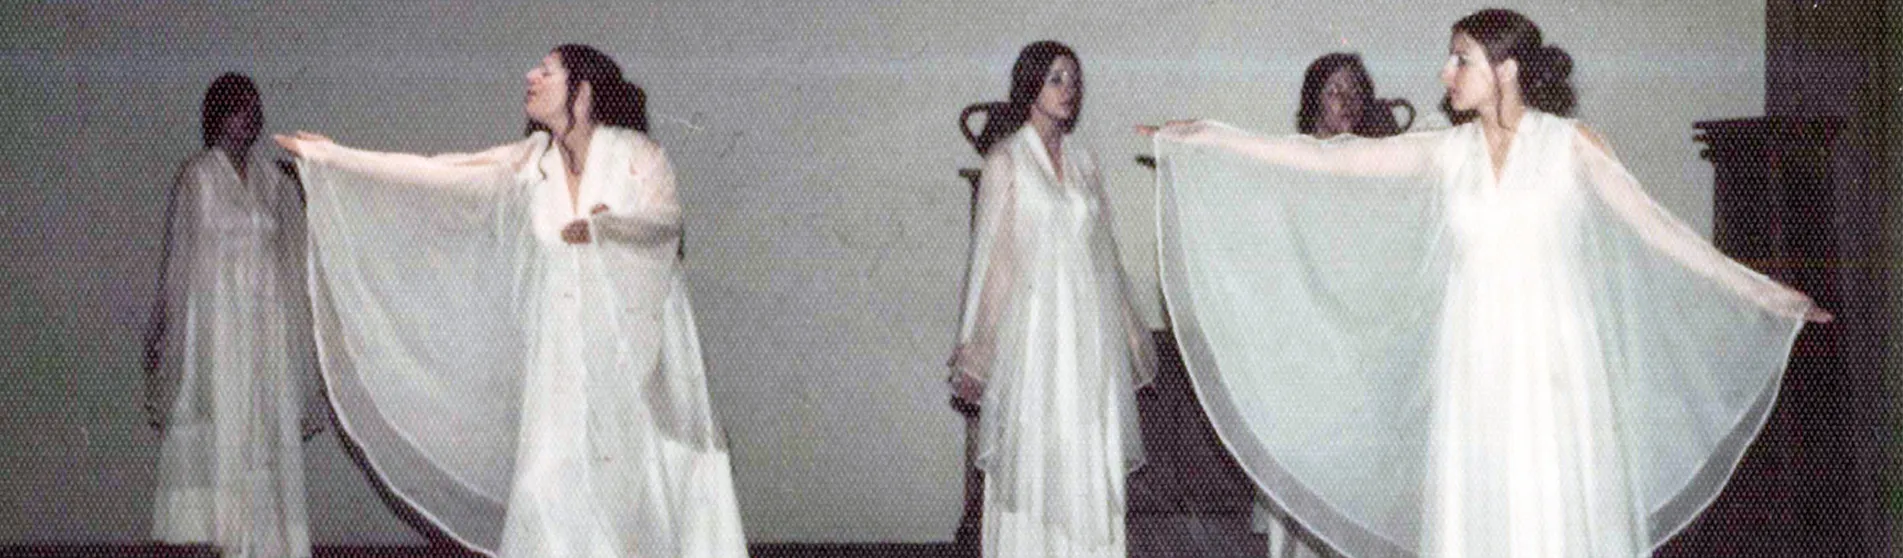 Mary in a white flowy dress as one of the Chorus members of the Greek play Medea.